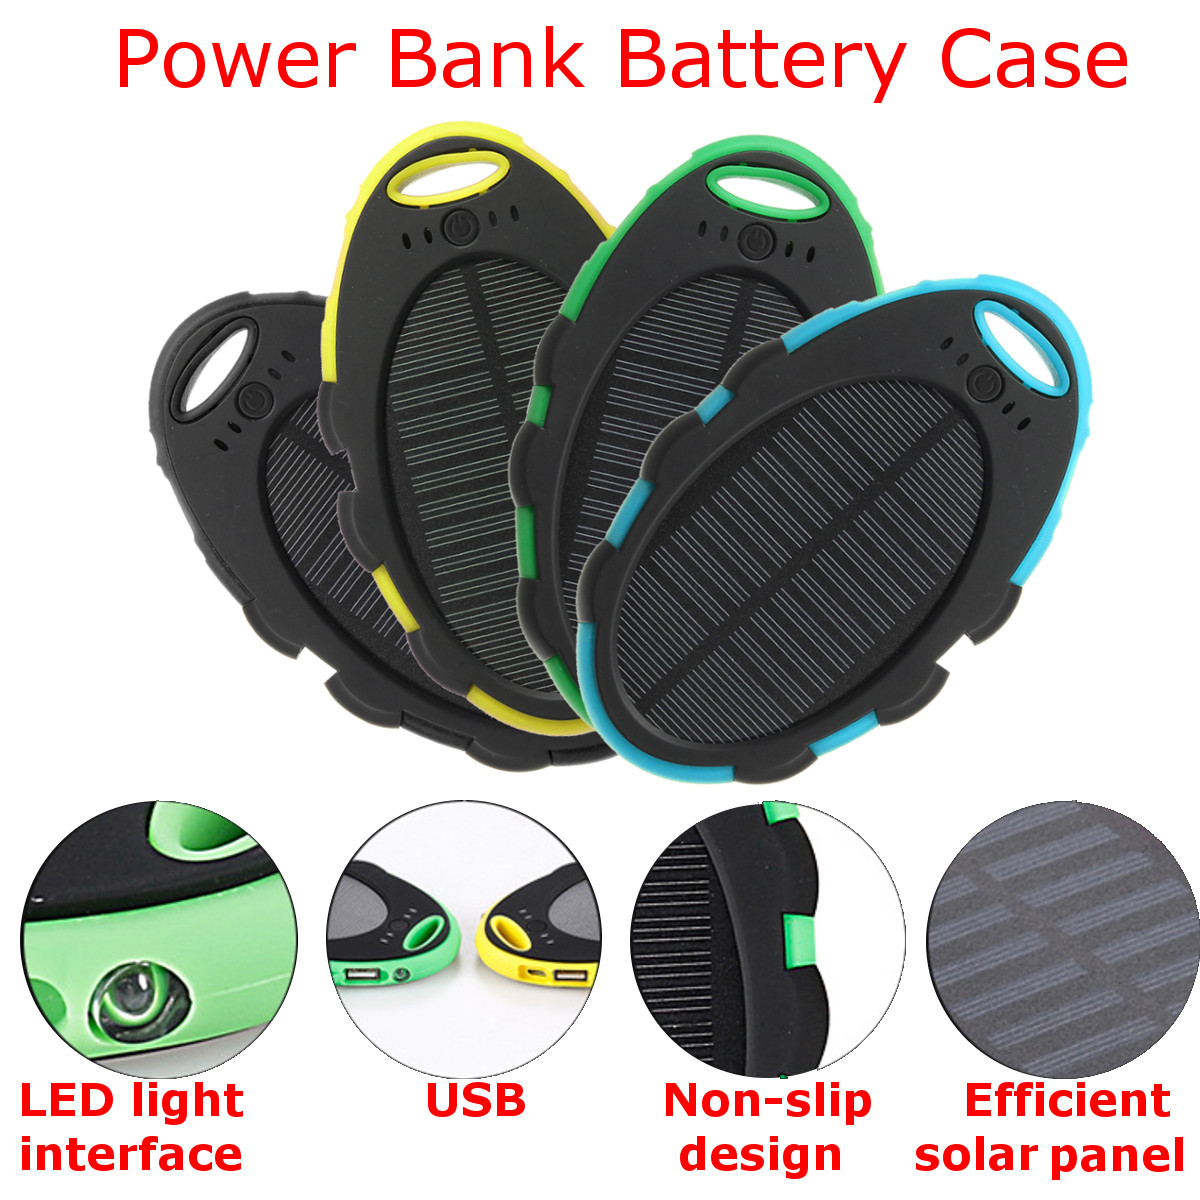 Diy-5000mAh-Dual-USB-Backup-Portable-Charger-Solar-Power-Bank-Case-for-Mobile-Phone-1243506-1